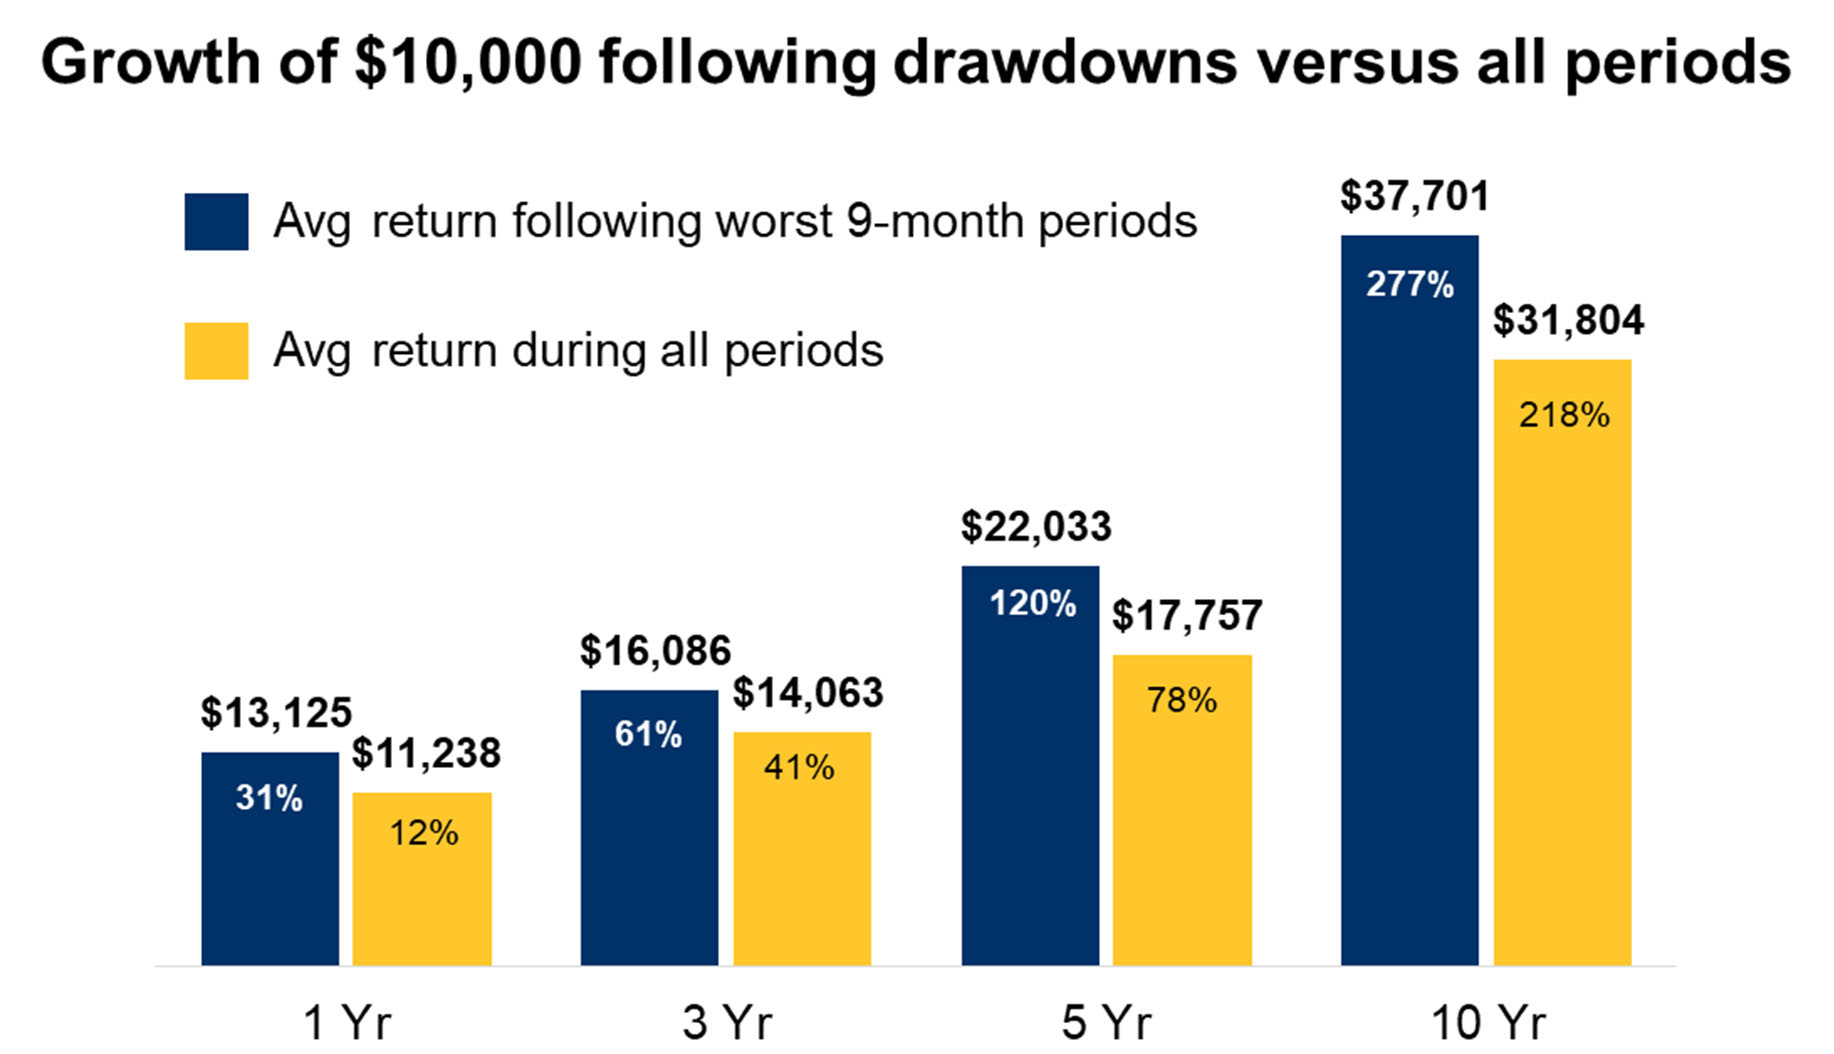 A chart showing the growth of $10,000 following drawdowns versus all periods.